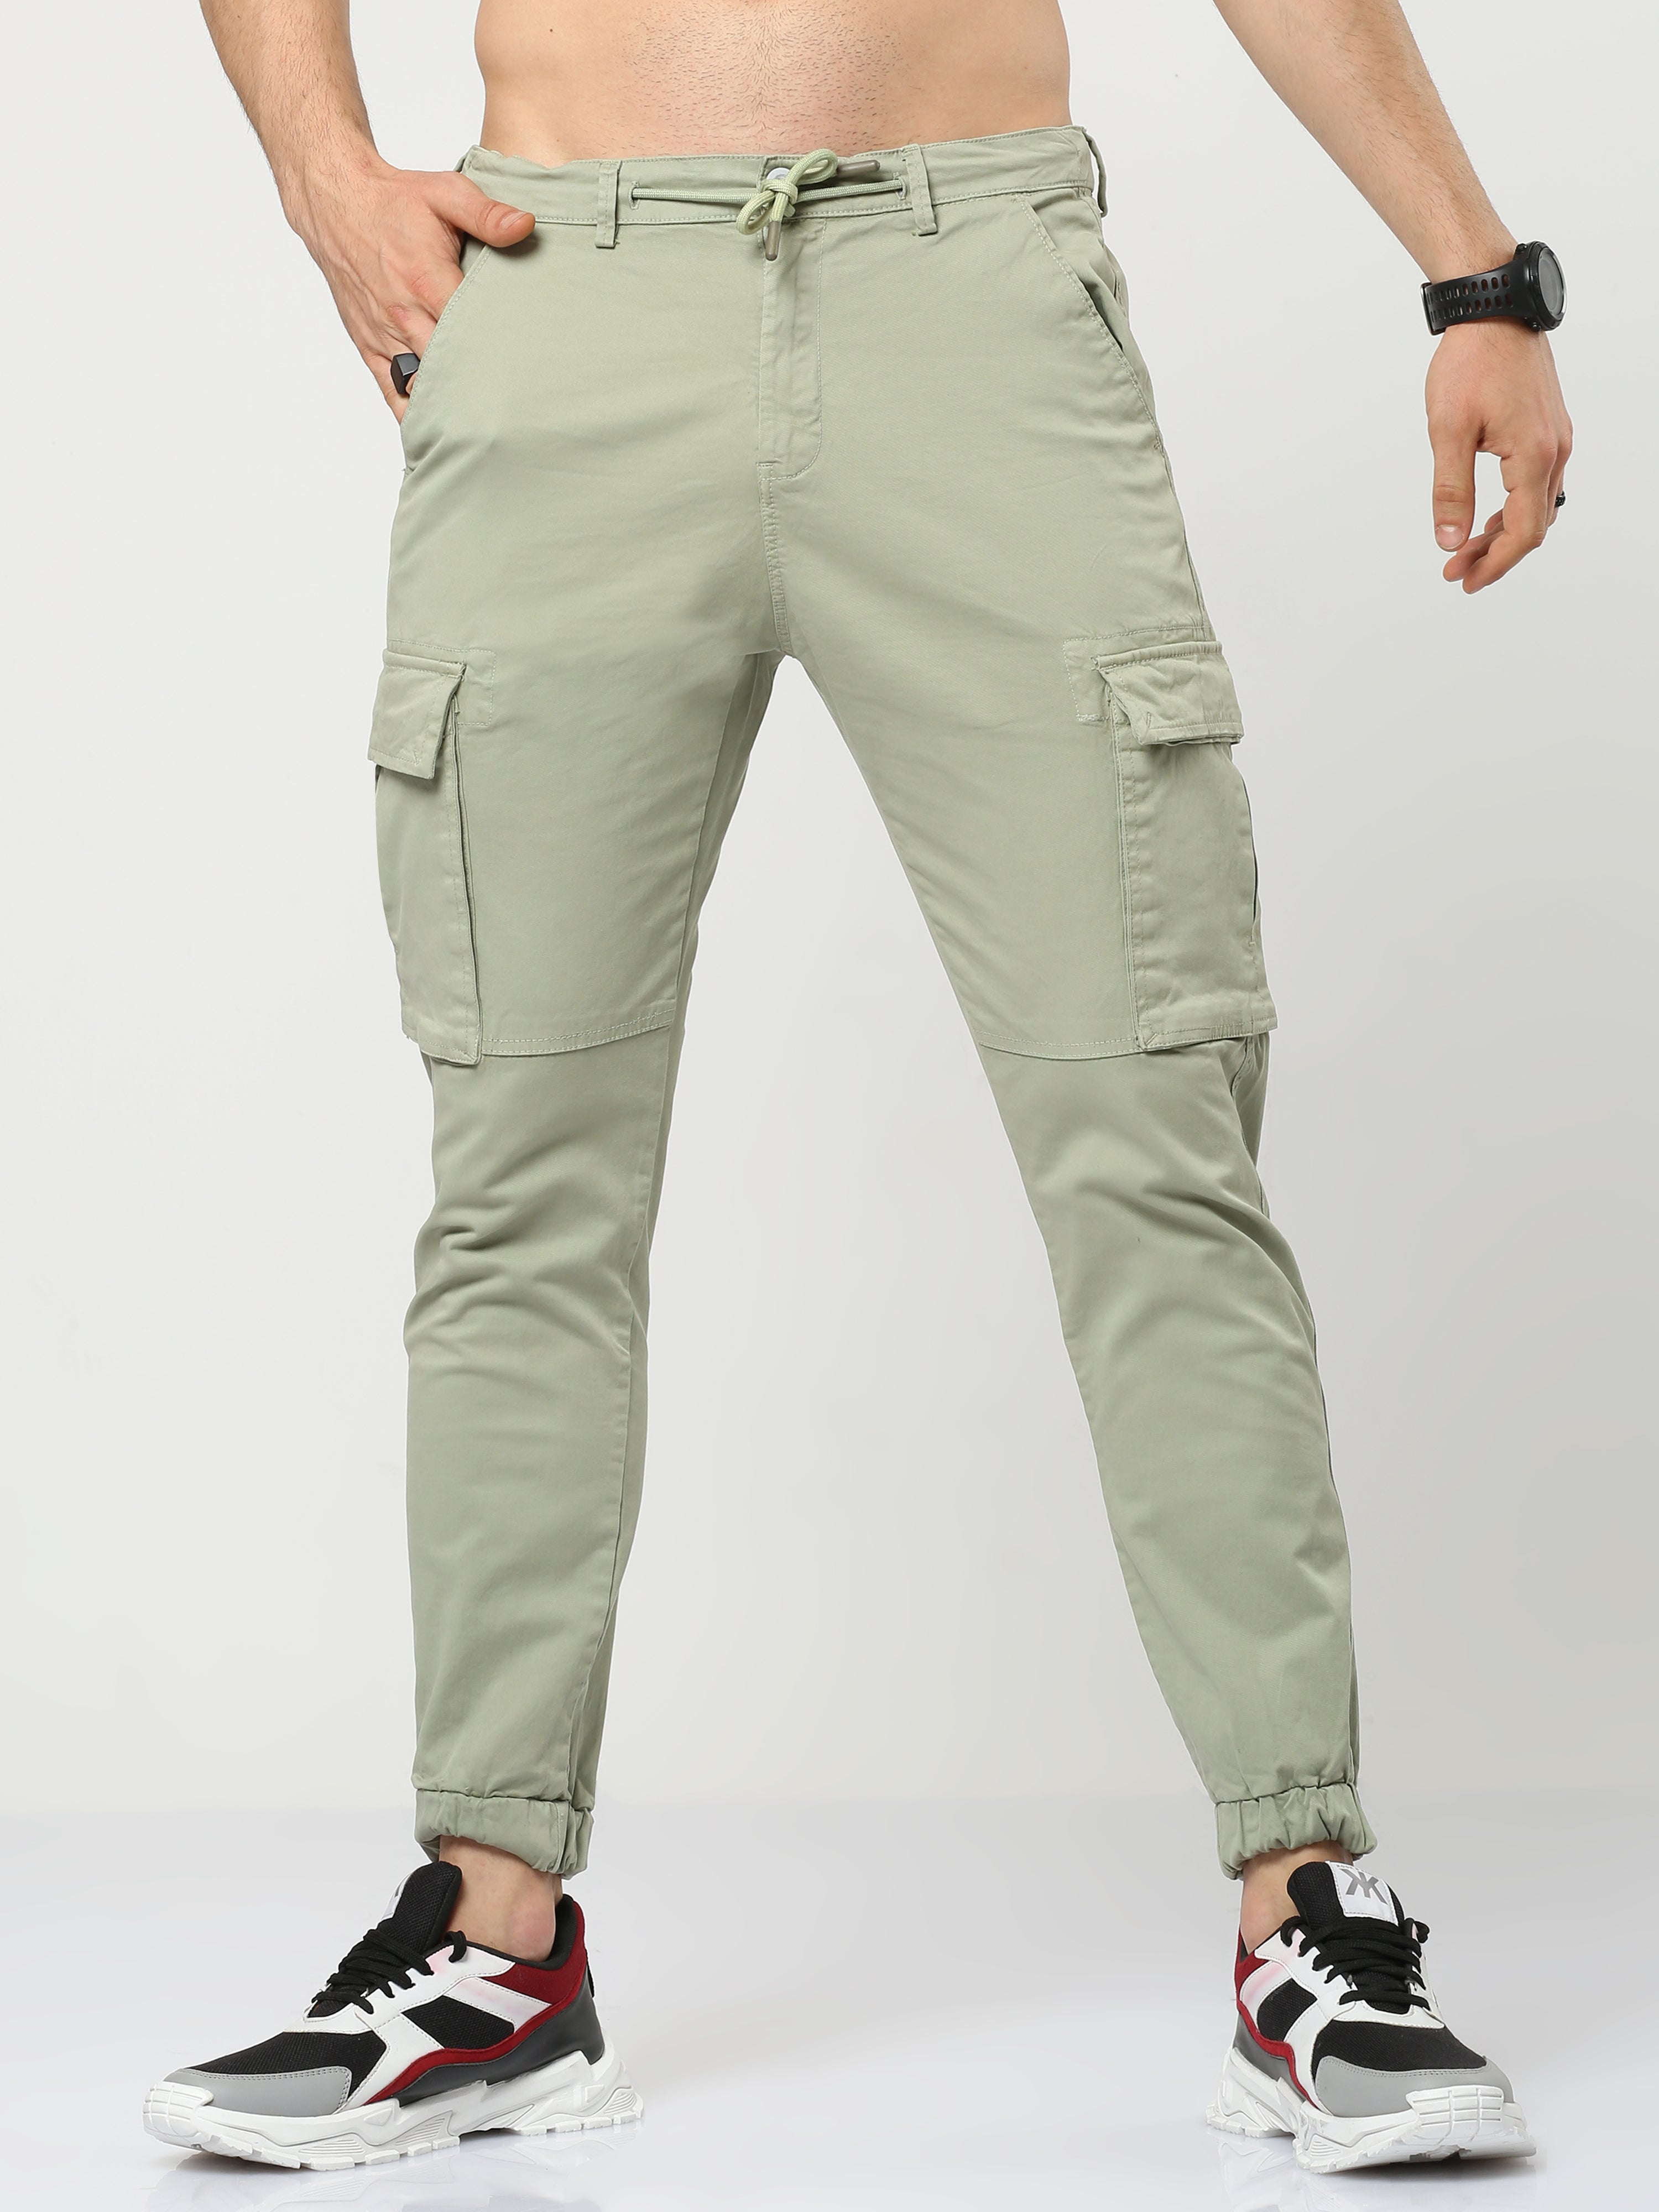 Genre Over Dyed Sage Green Cargos